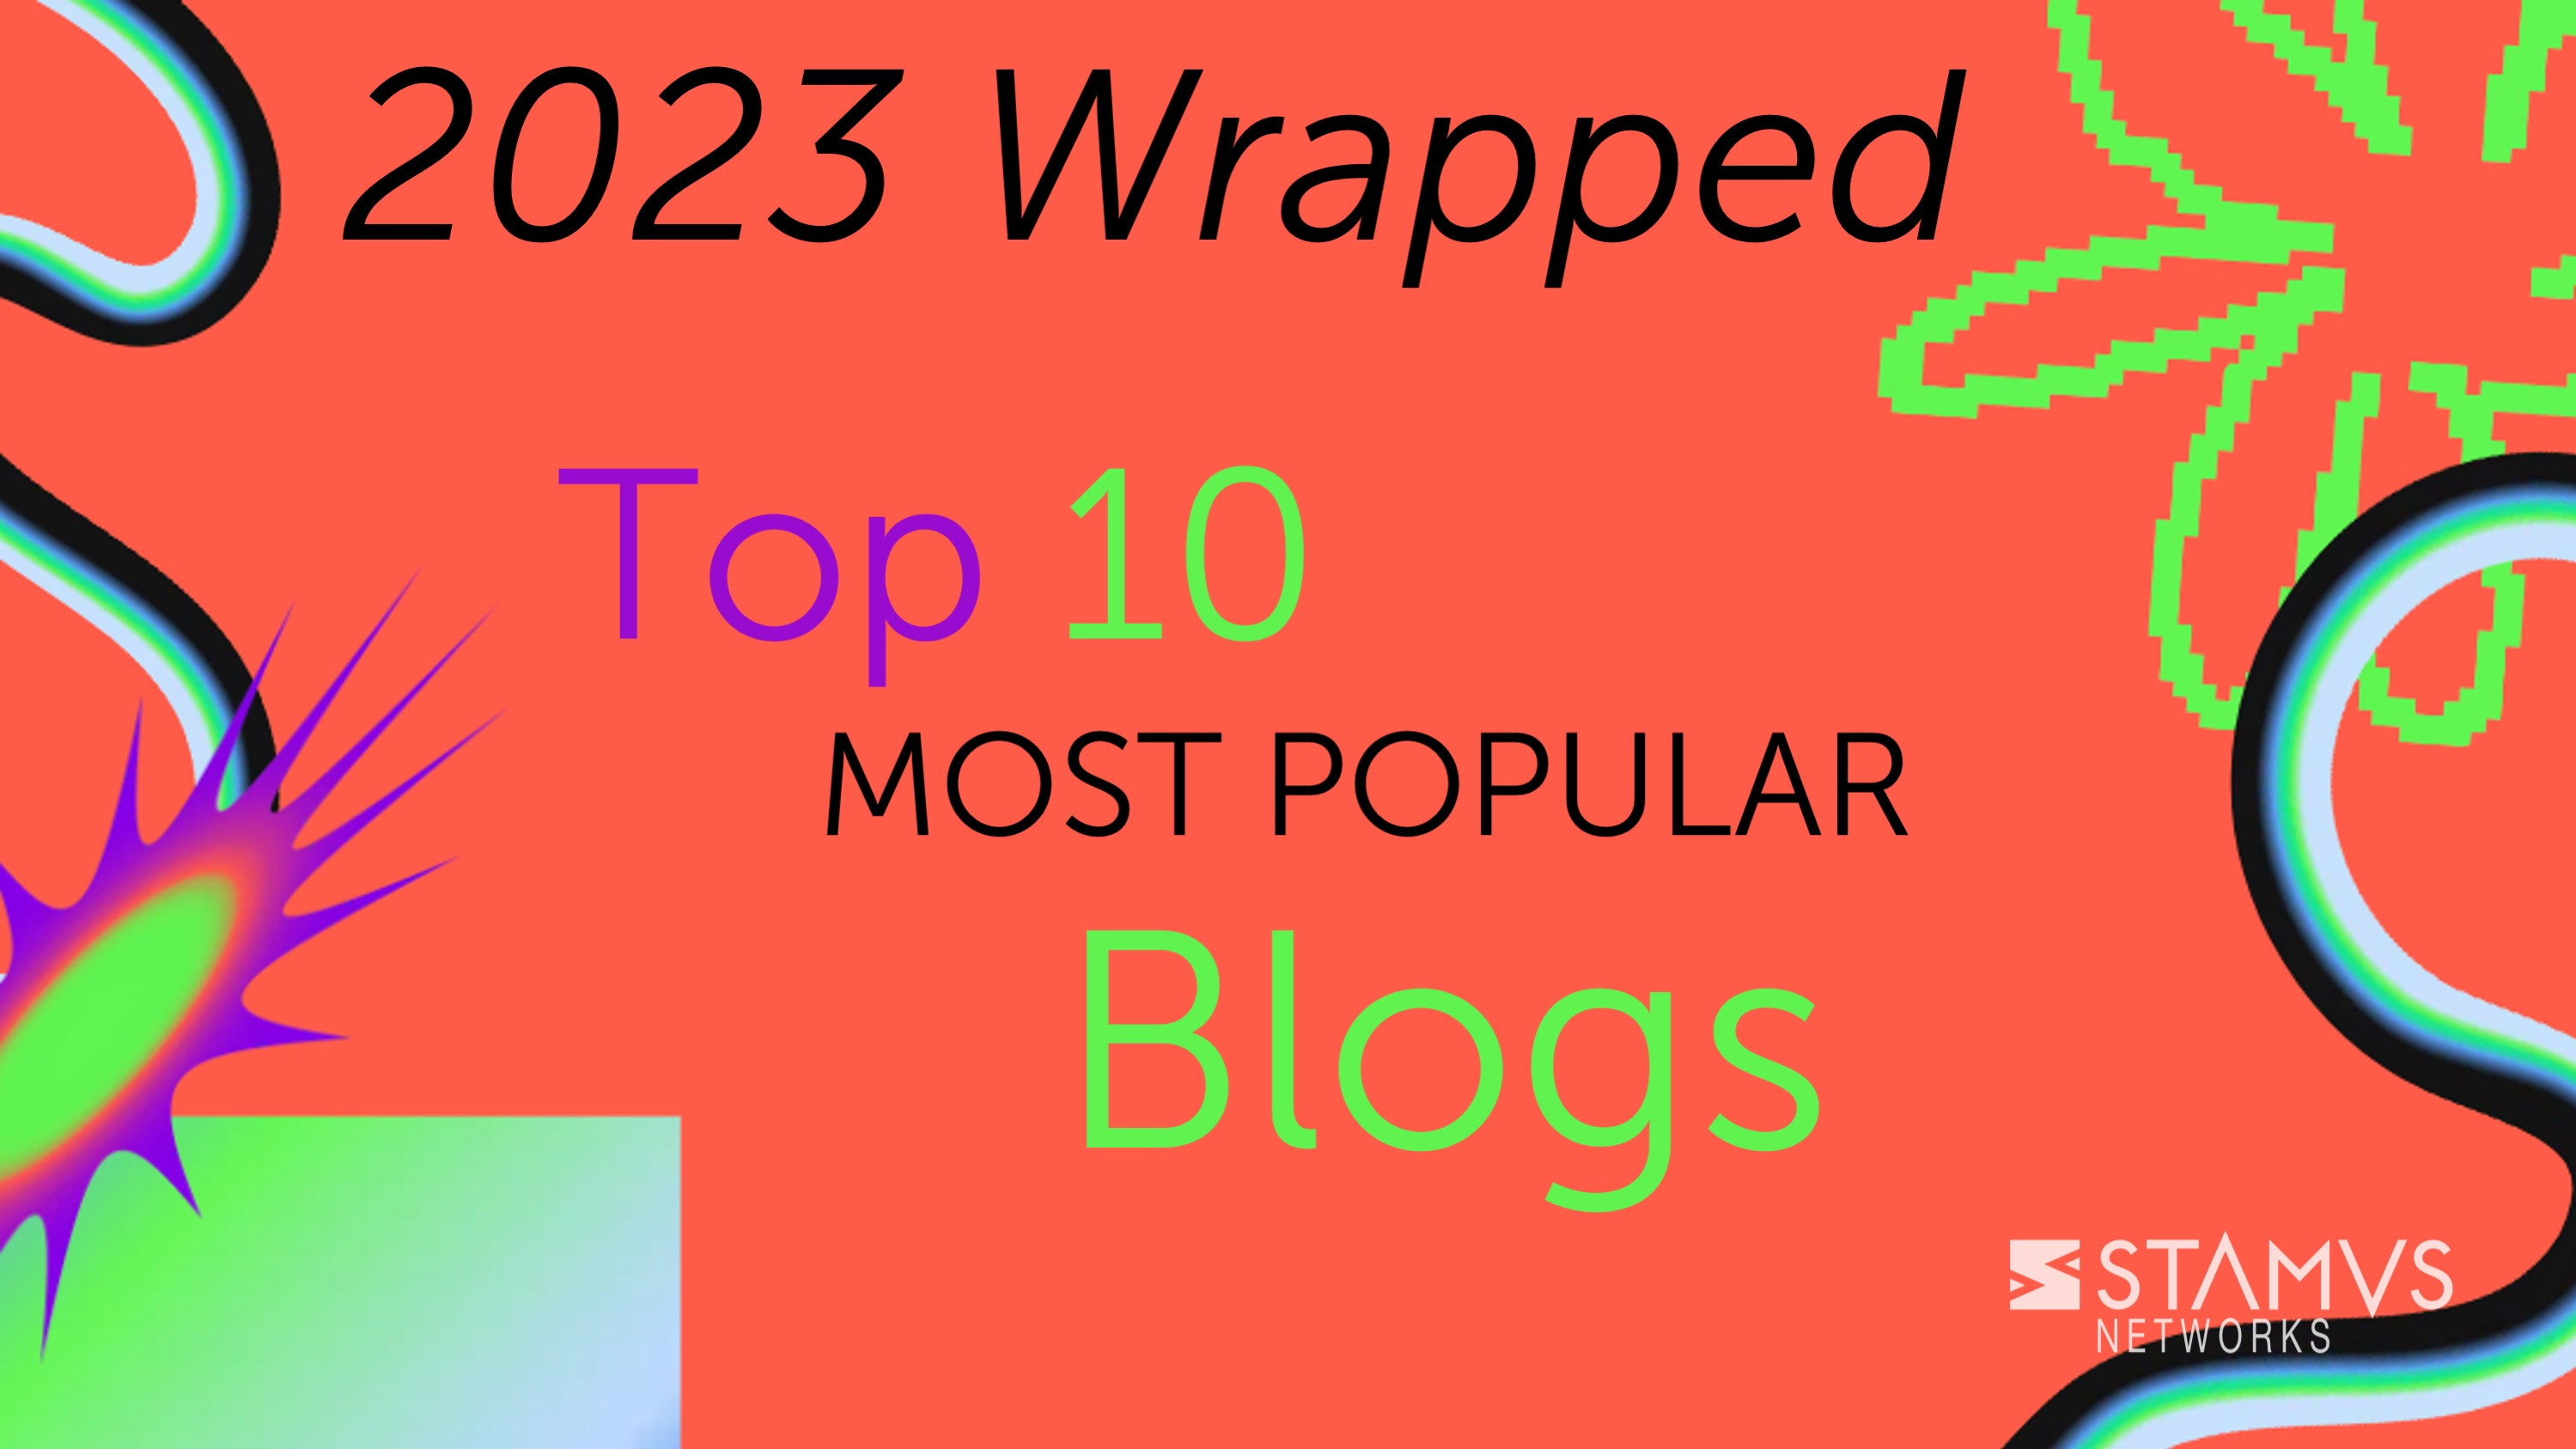 2023 Wrapped: Top 10 Most Popular Blogs